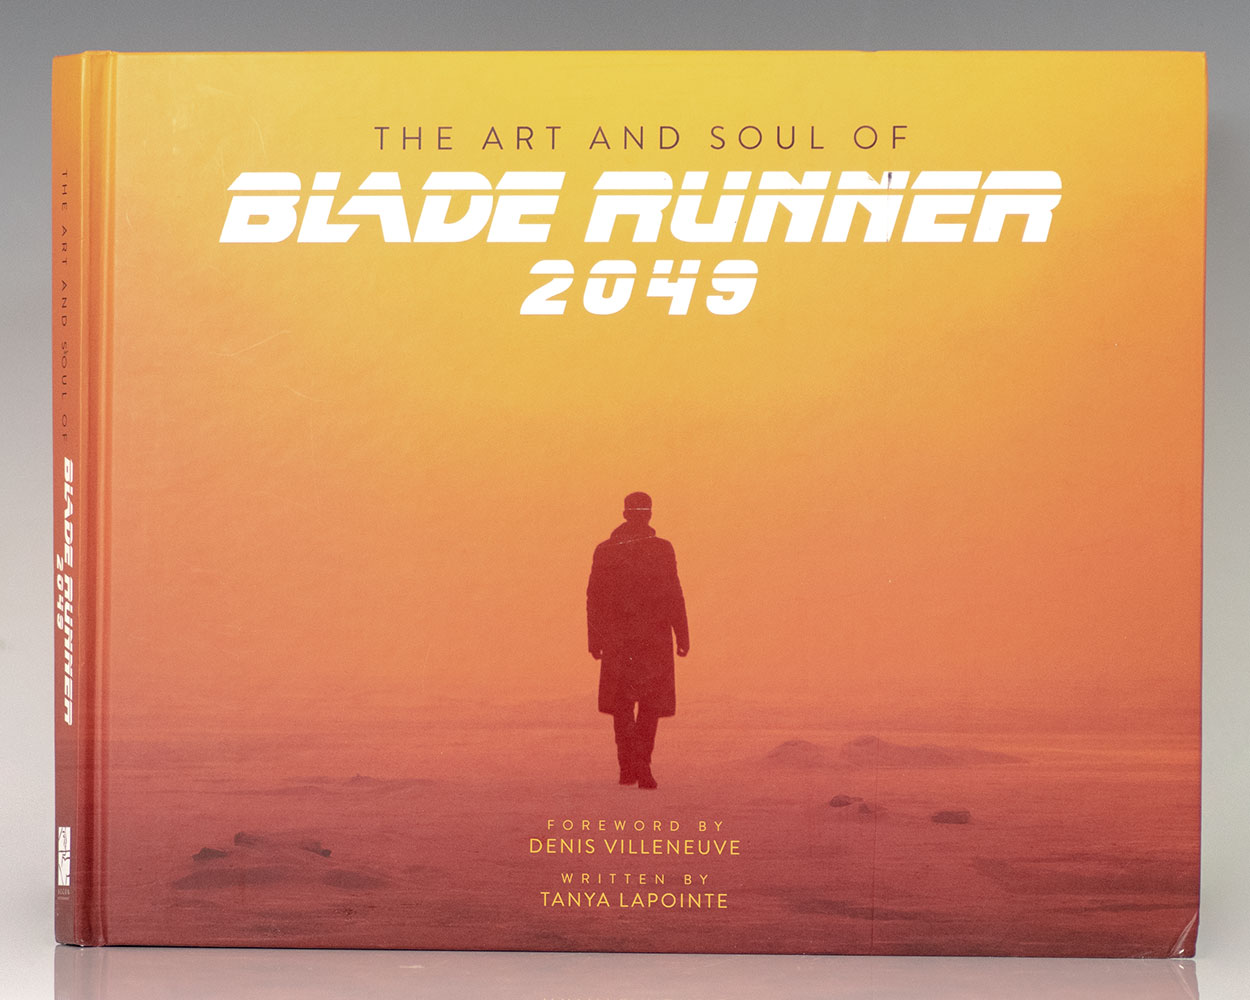 The Art and Soul of Blade Runner 2049.